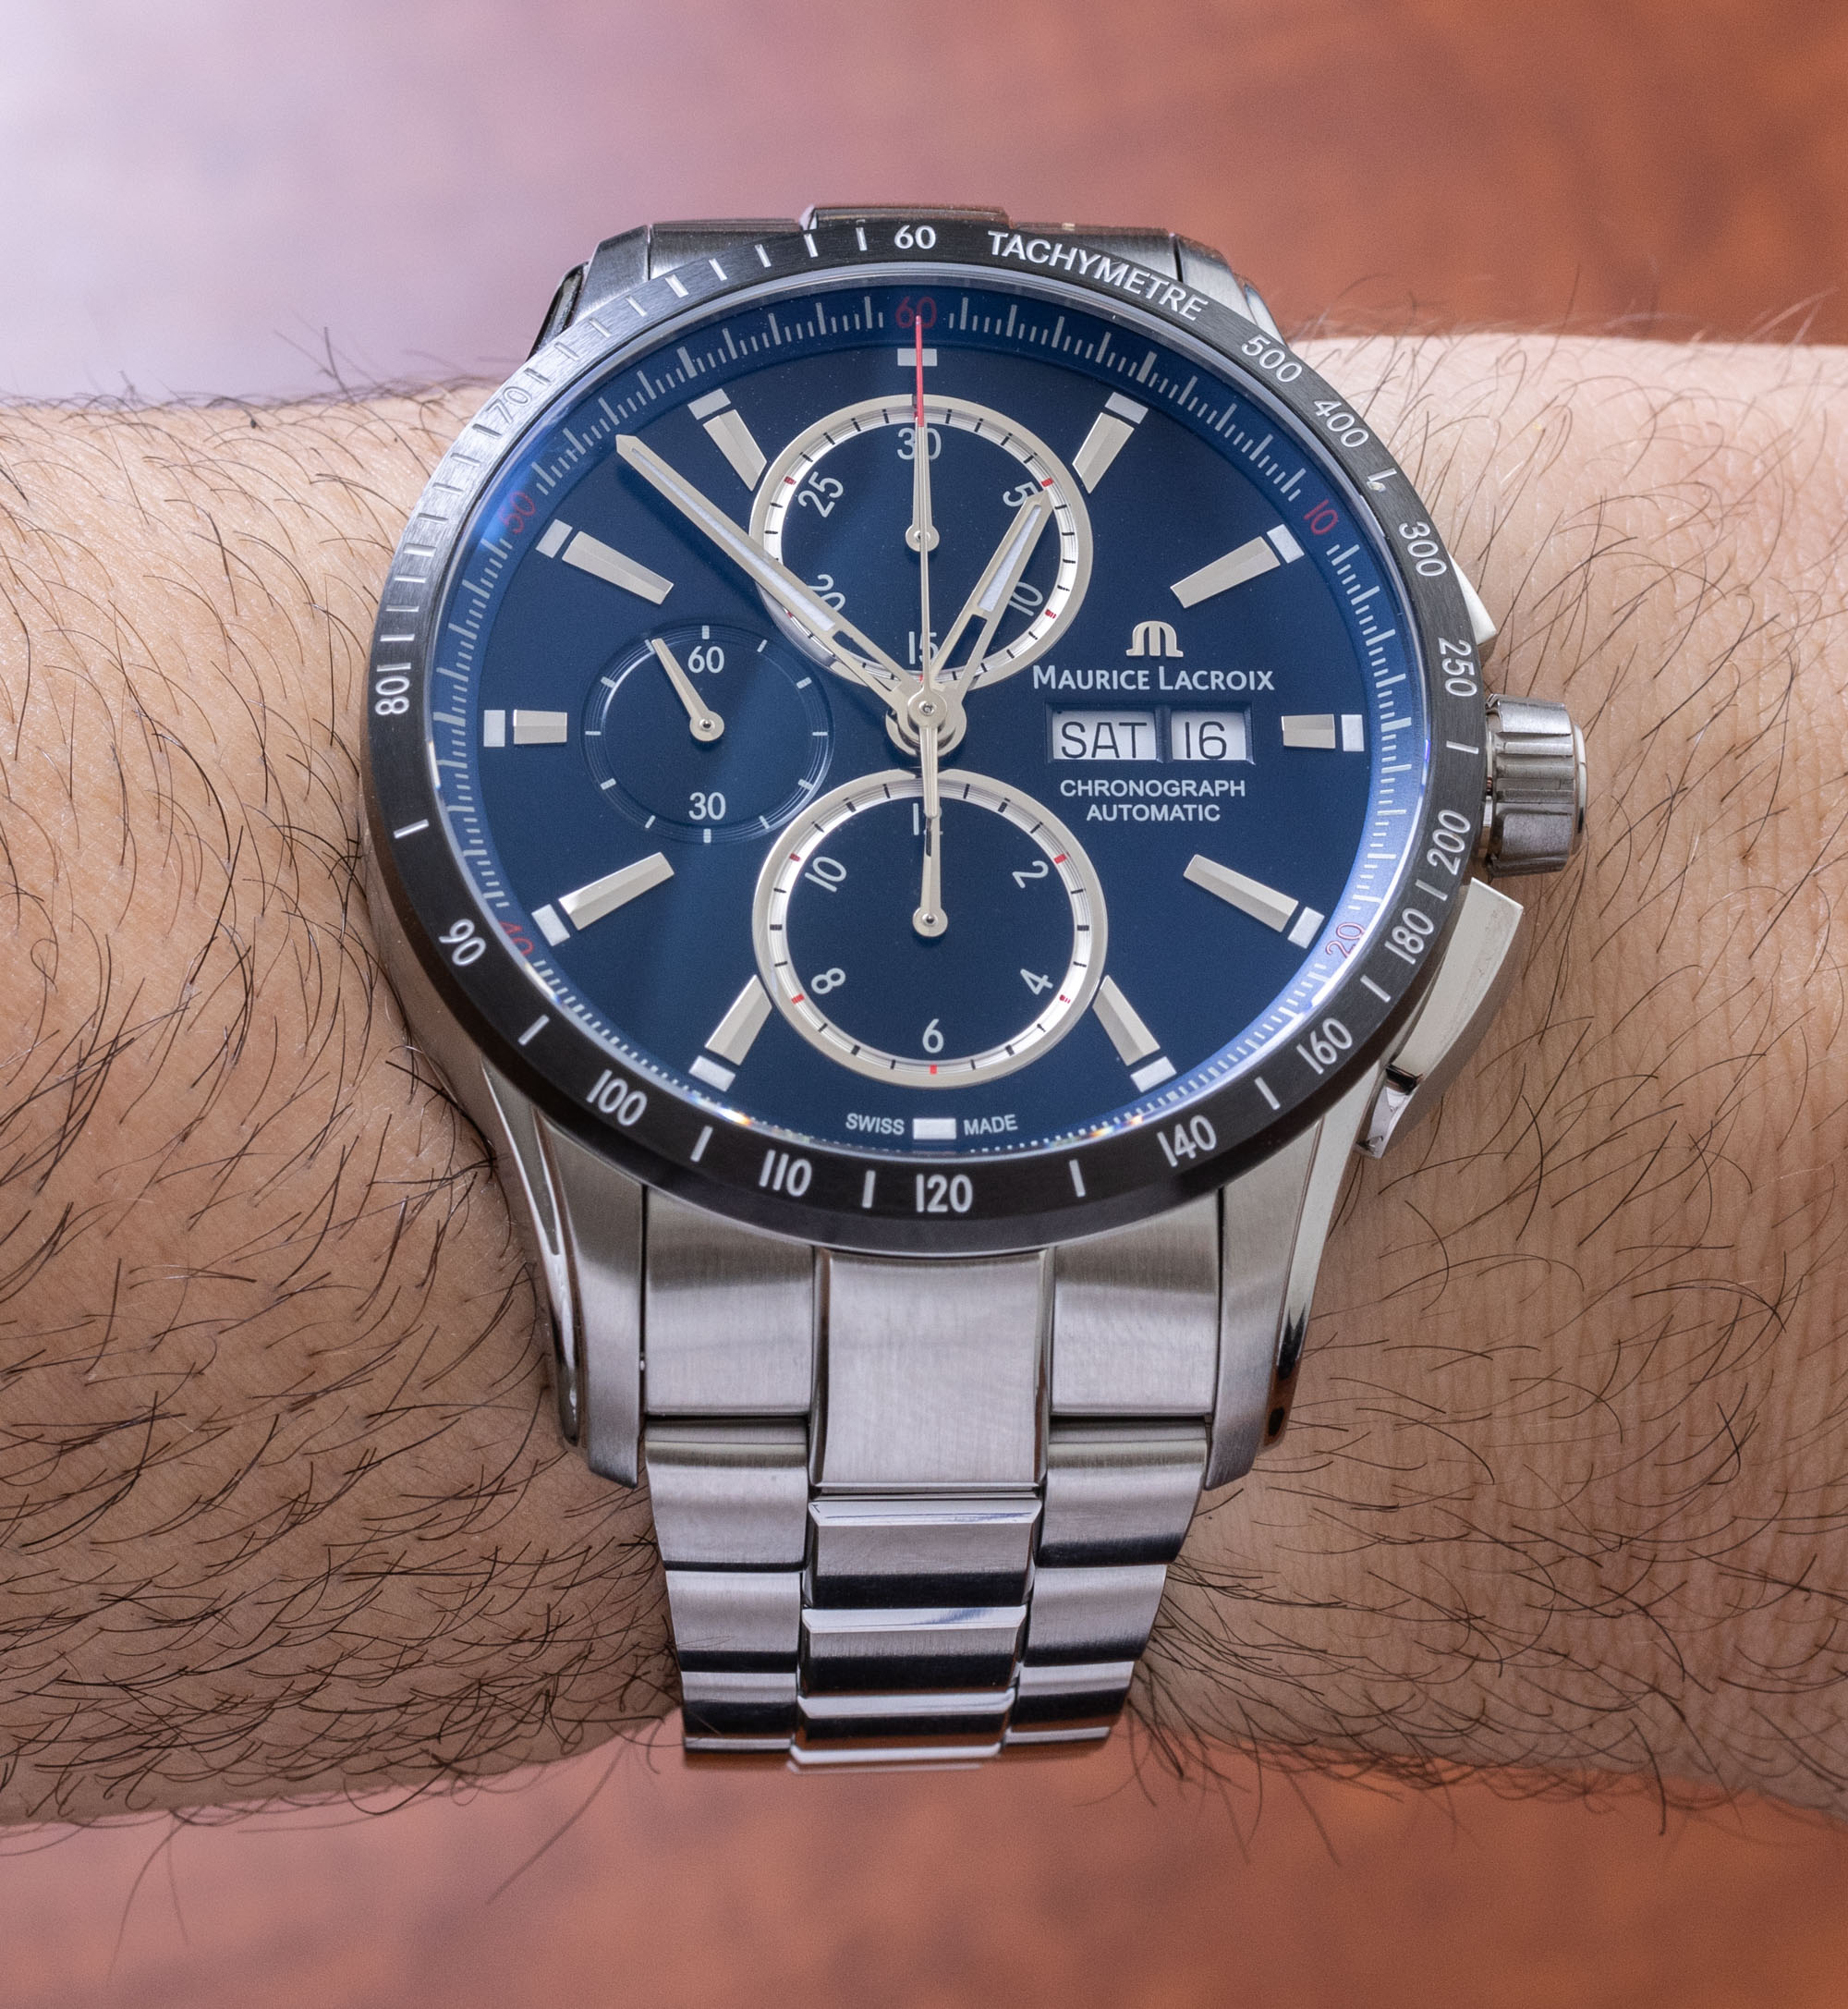 Chronograph Lacroix S Watch 43mm aBlogtoWatch Maurice PONTOS Review: |